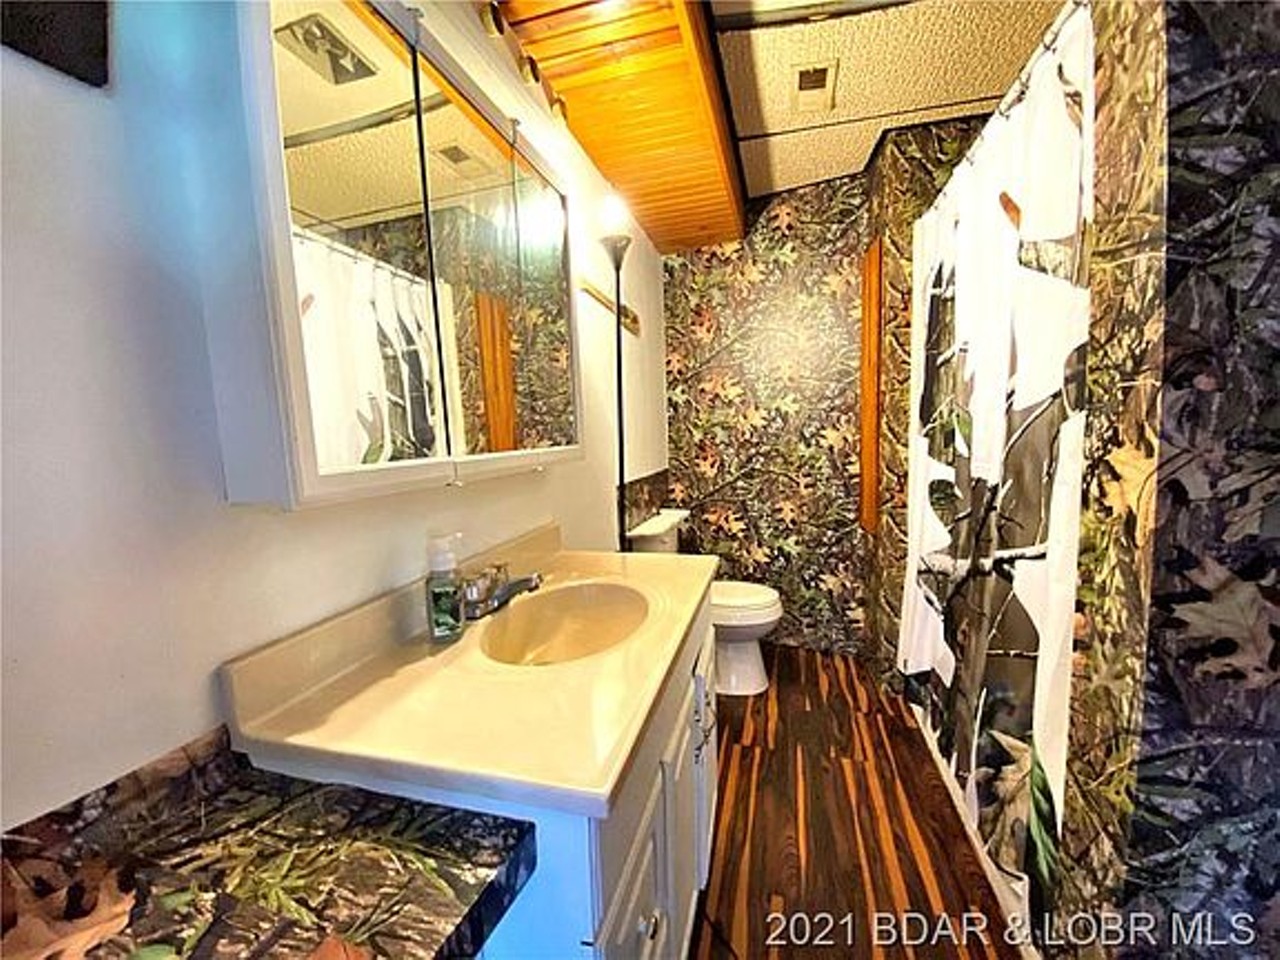 This Geodesic Dome Near the Lake of the Ozarks Has a Camouflage Bathroom [PHOTOS]